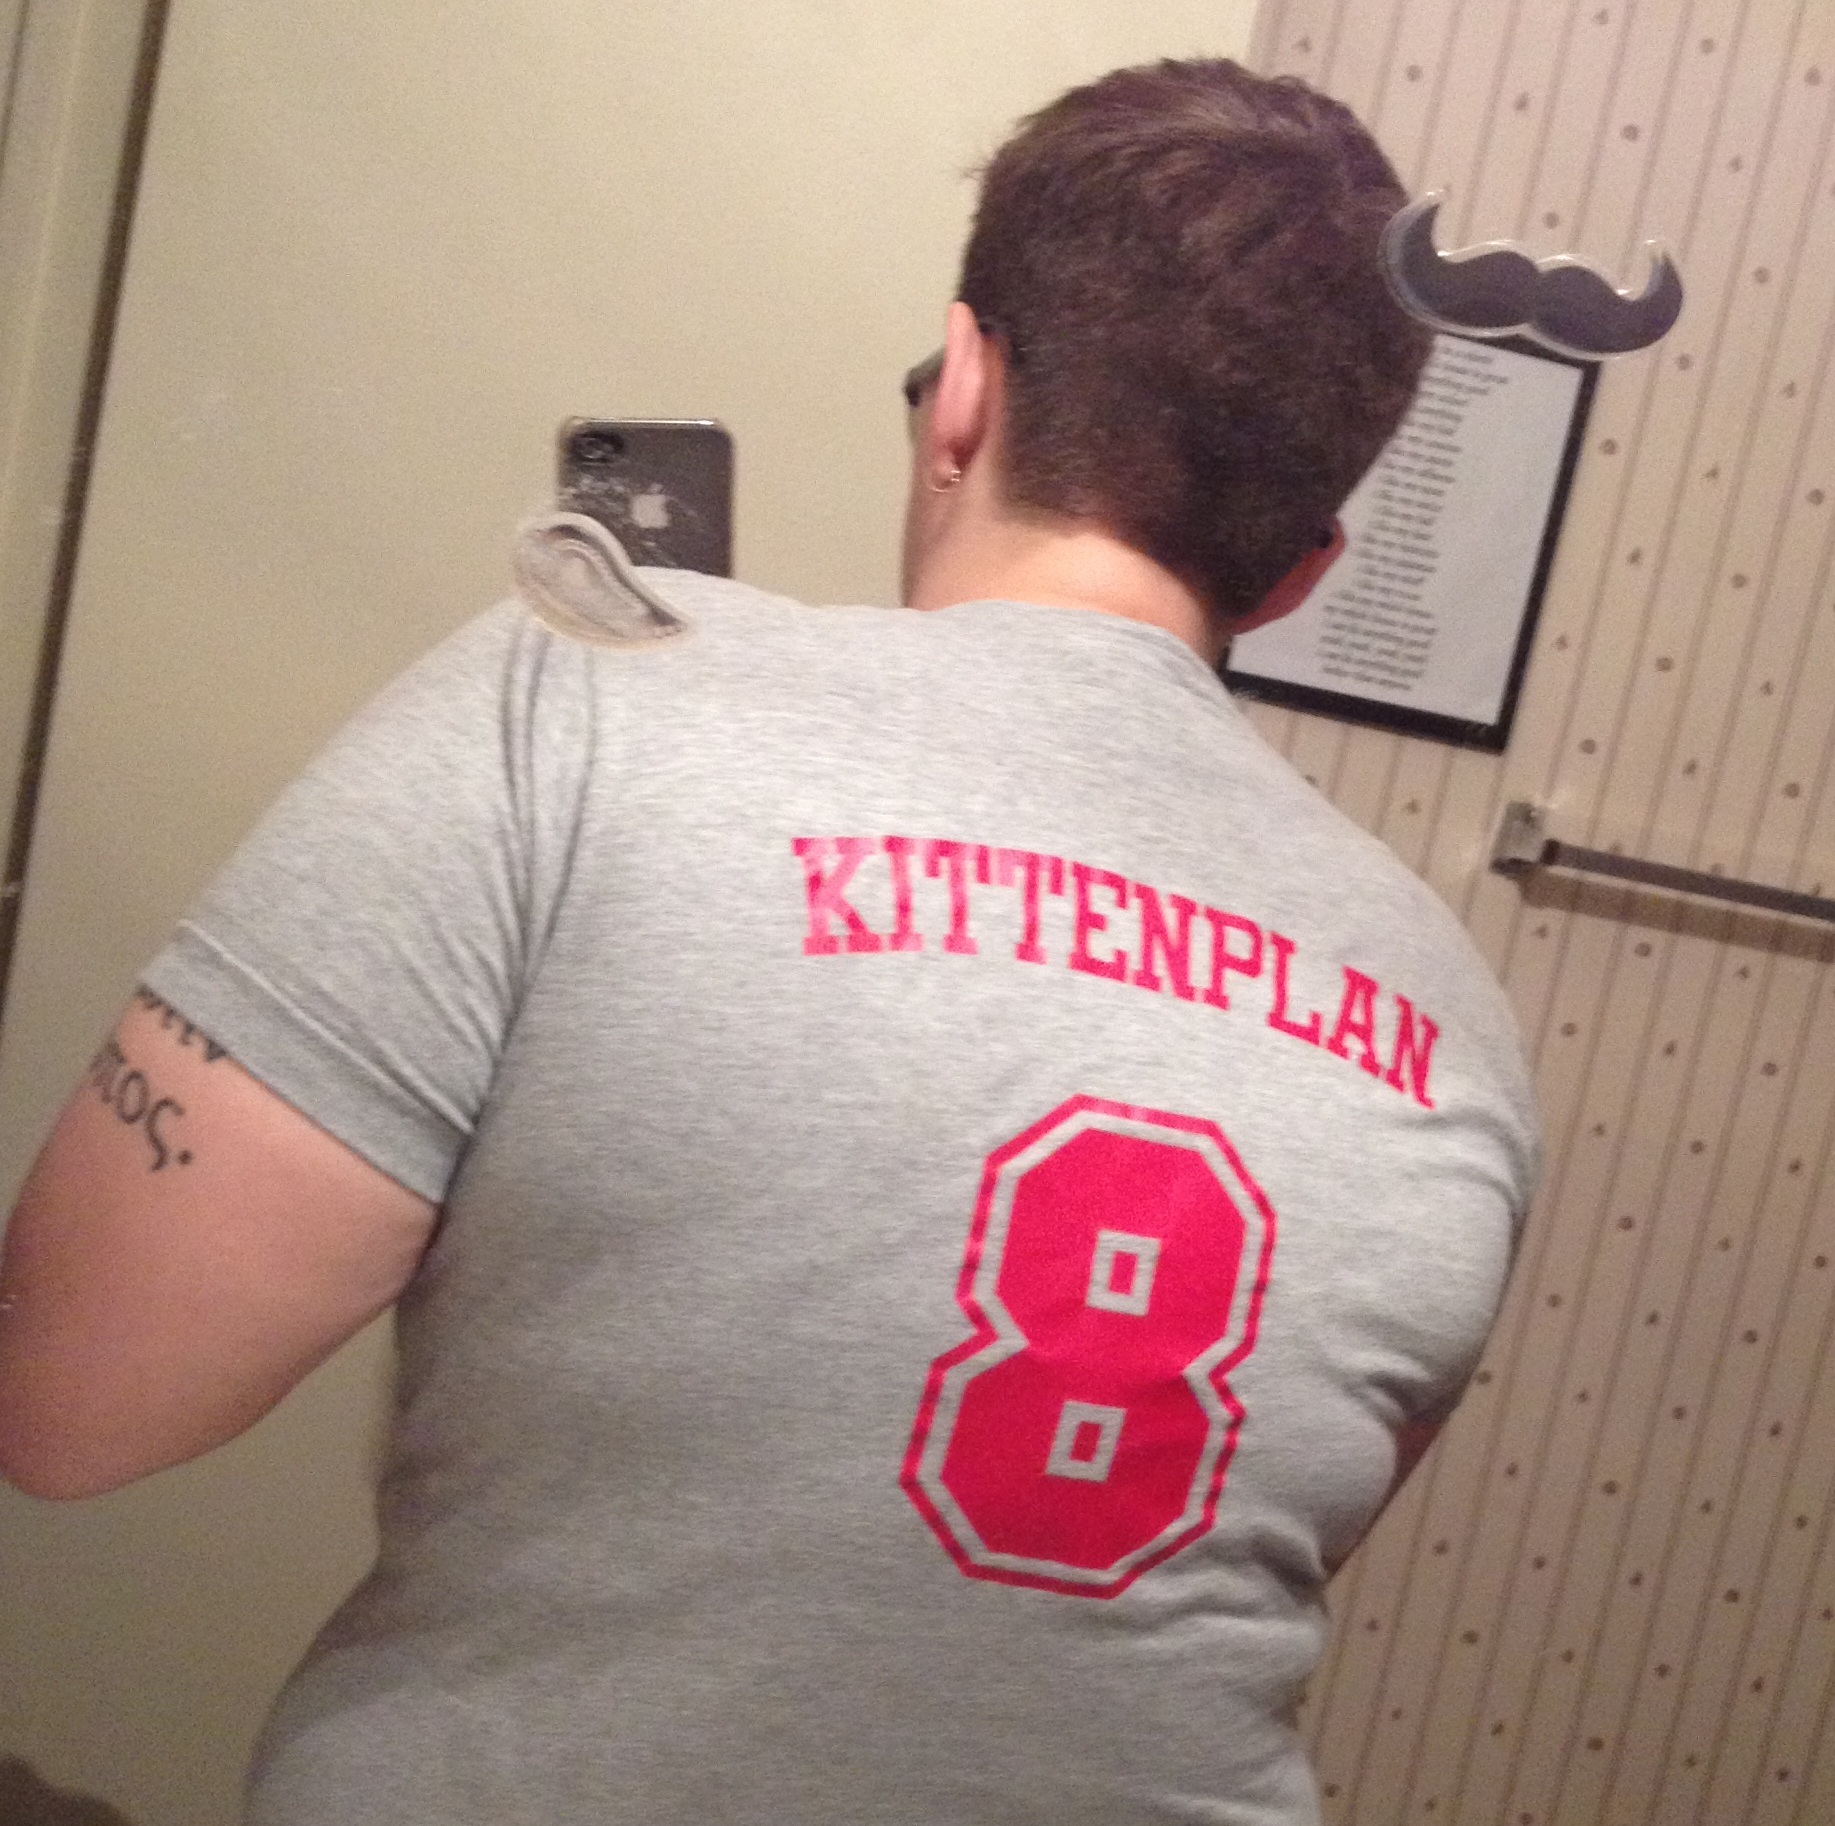 Kendall wearing a gray tshirt with "KITTENPLAN" and "8" written on the back in red lettering